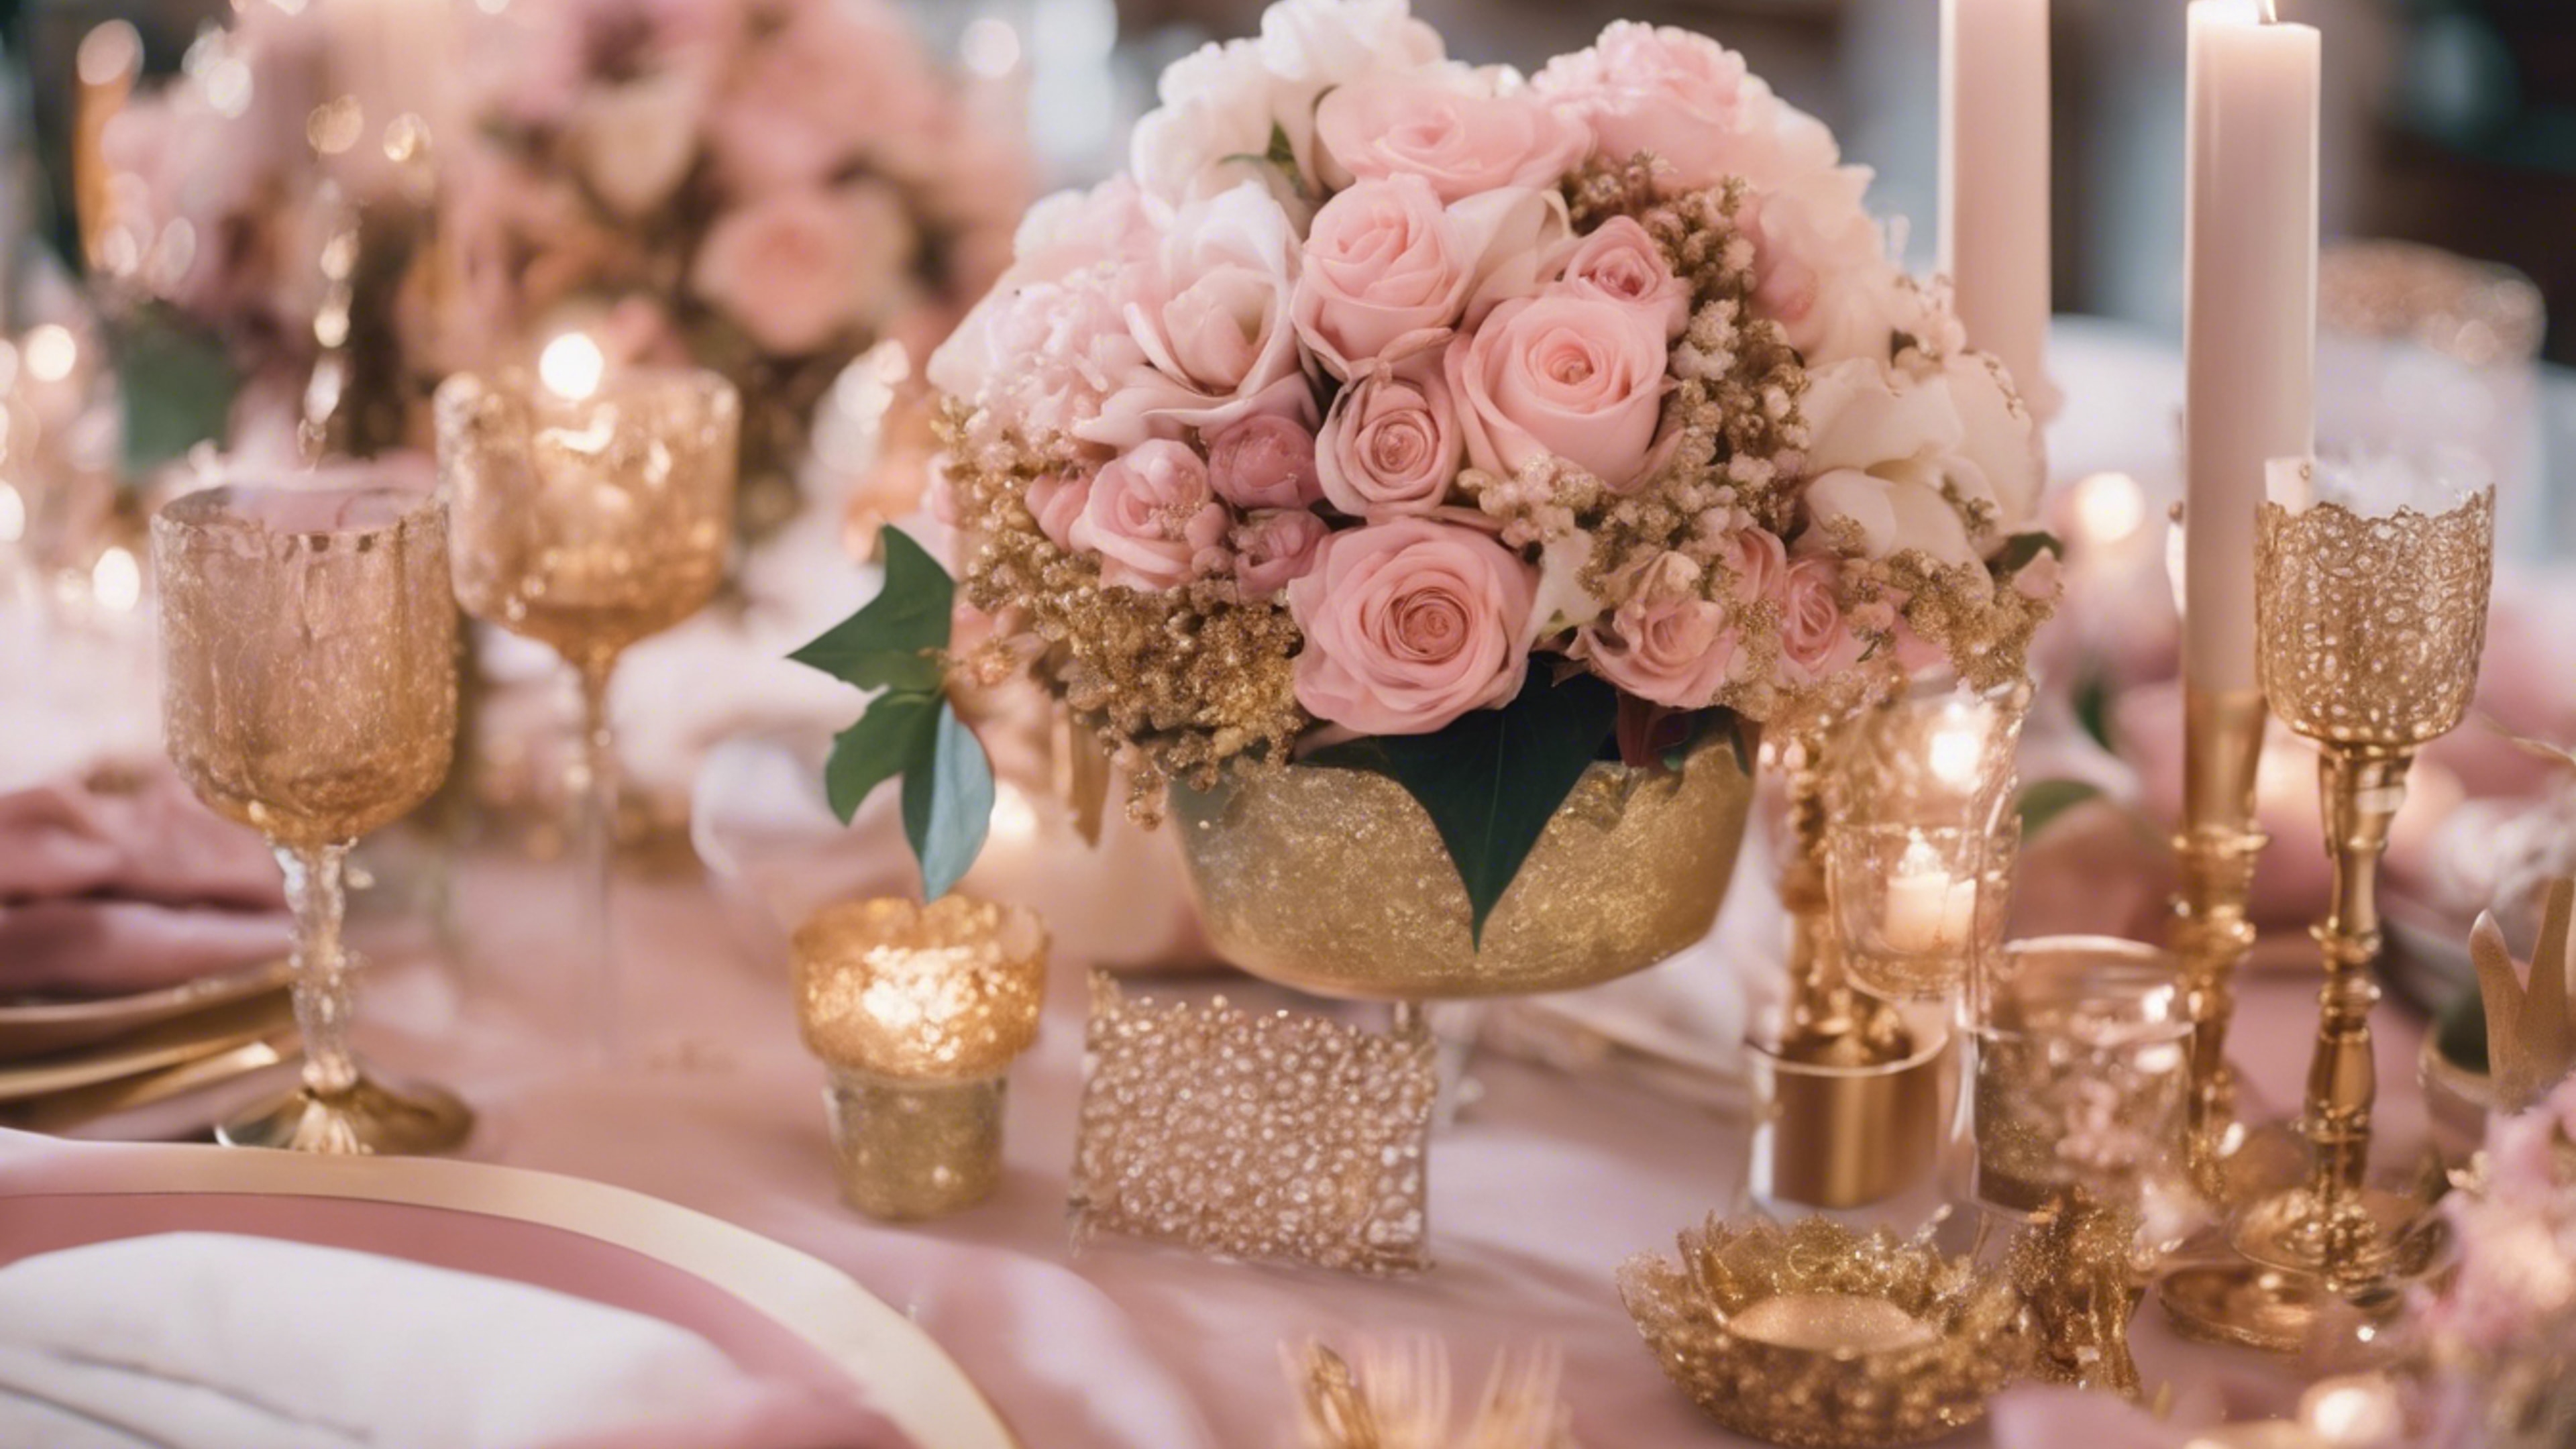 An ethereal pink and gold themed wedding decorations with flowers and metallic accents. Fond d'écran[814998f188fb45f48f1c]